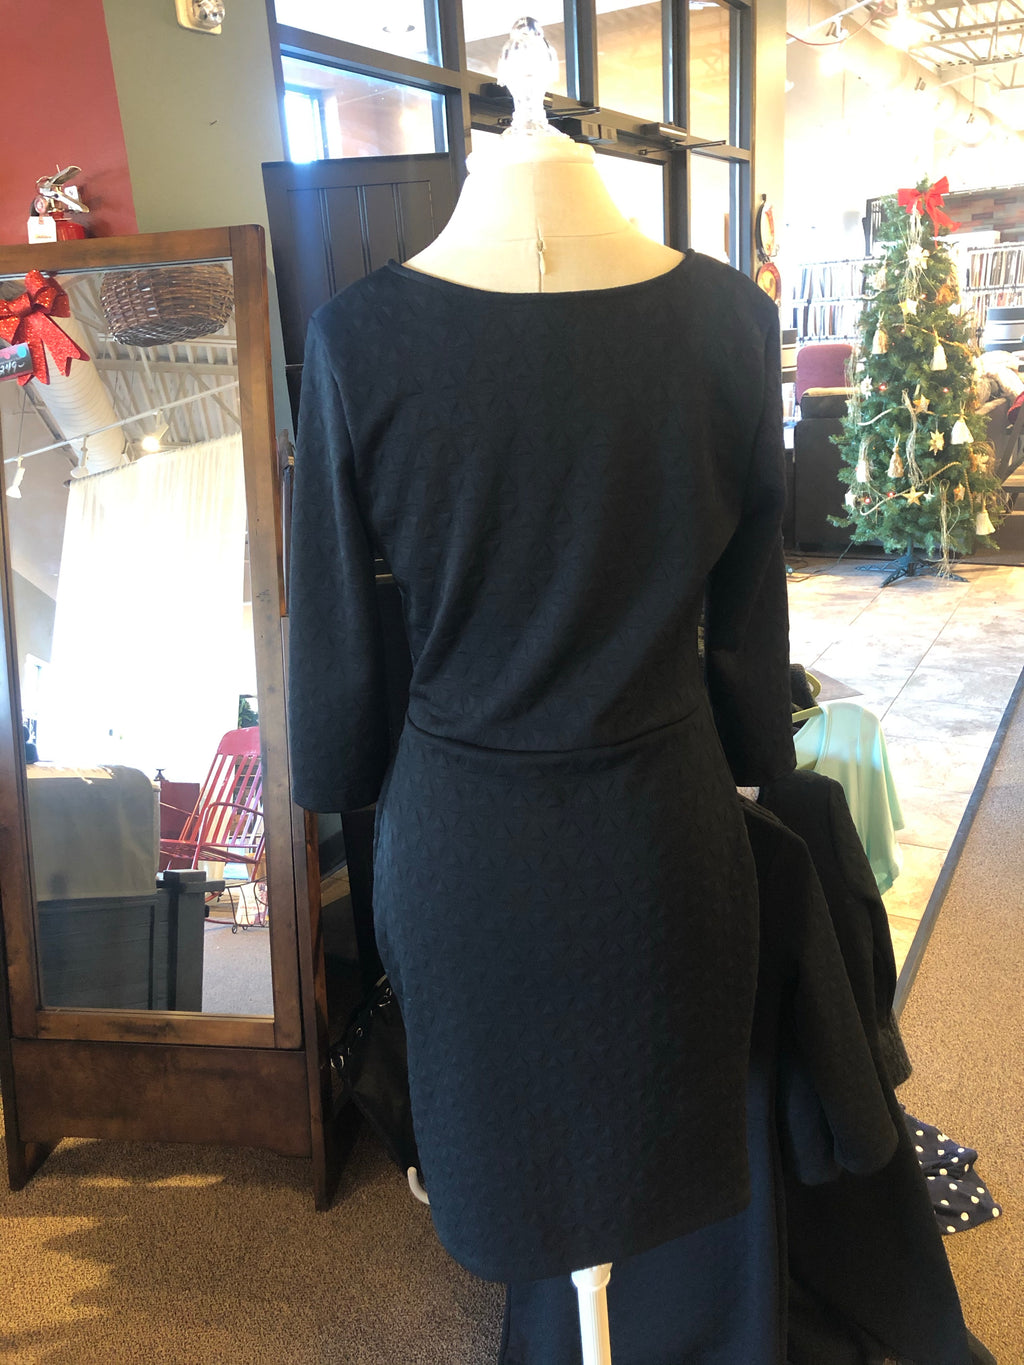 Black textured dress with knot